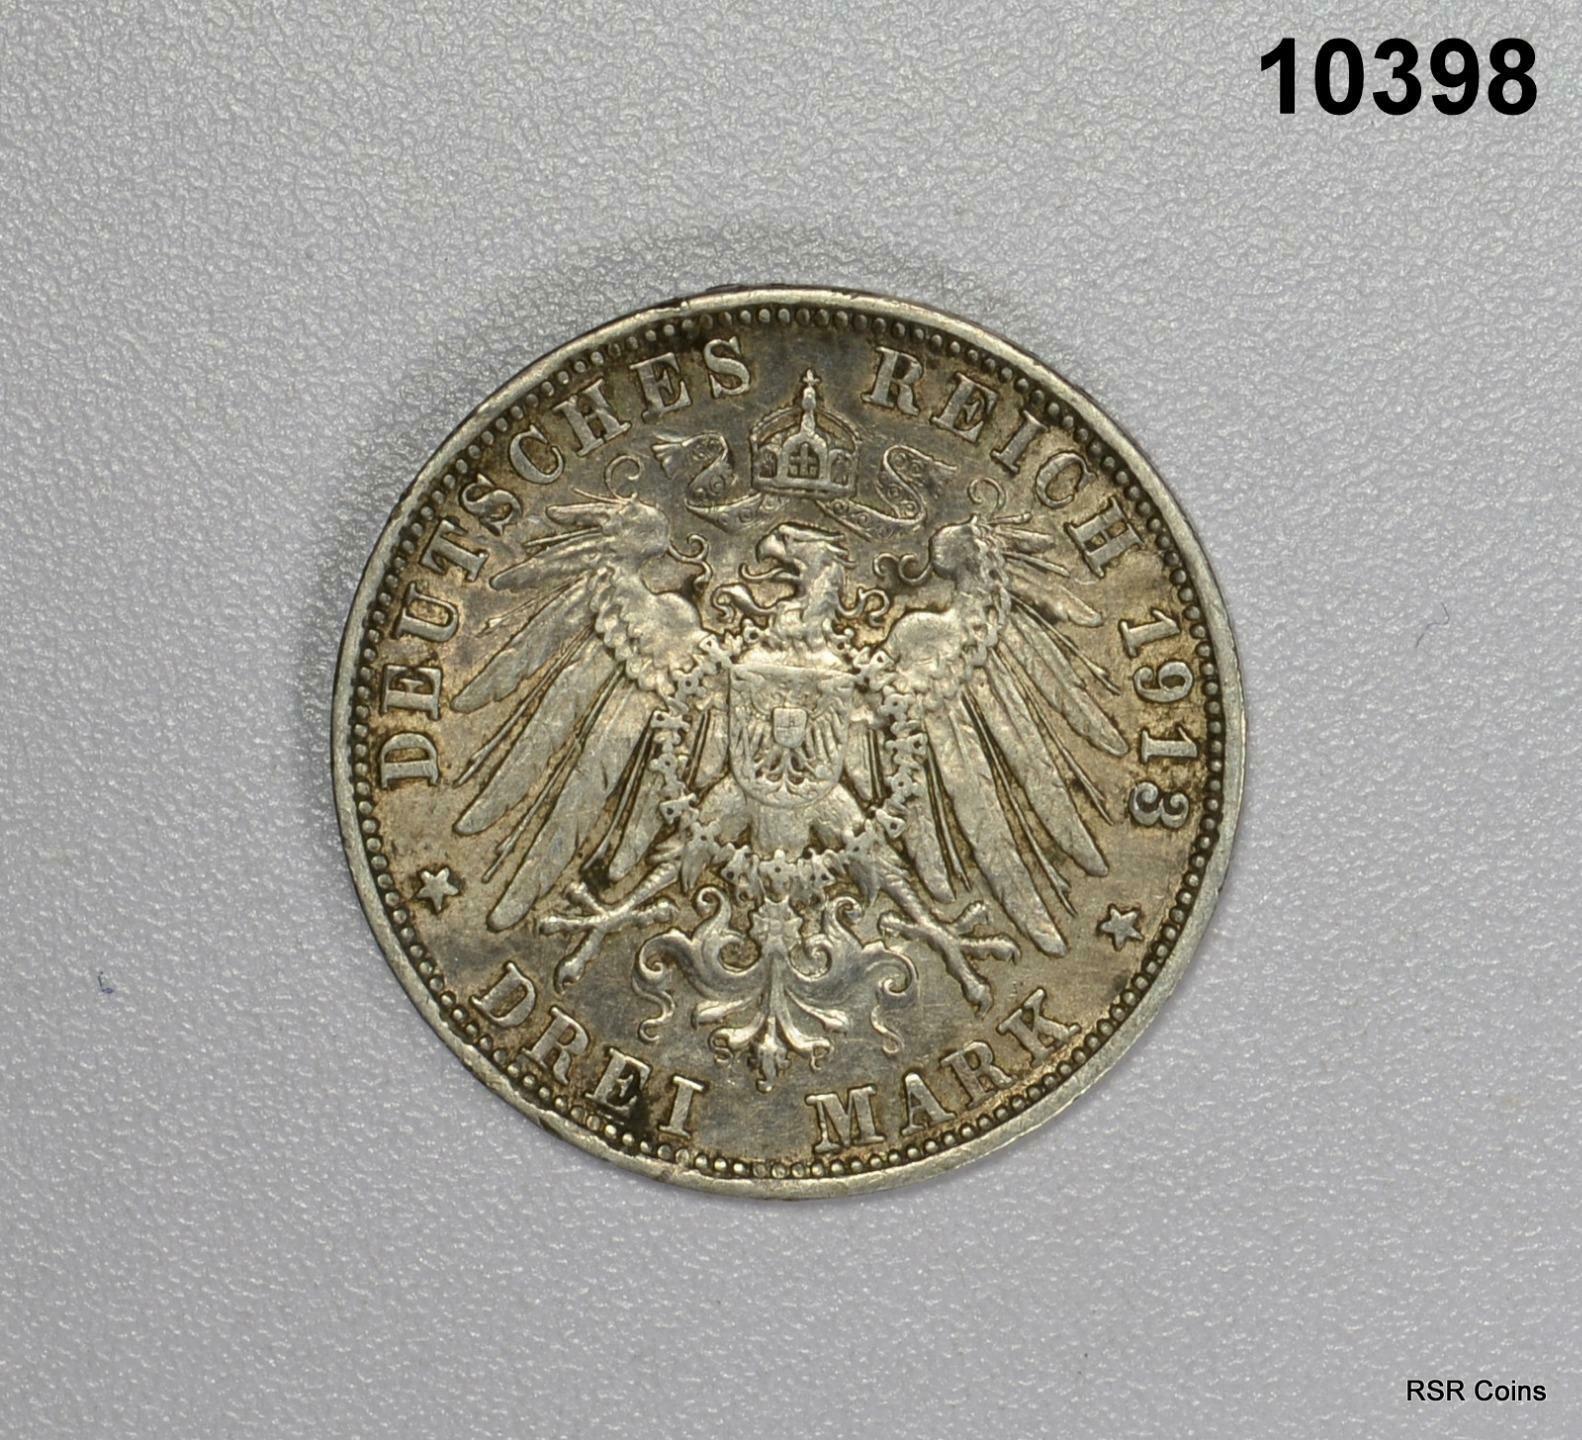 1913 D GERMAN STATES OTTO KING OF BAVARIA 3 MARK SILVER COIN #10398